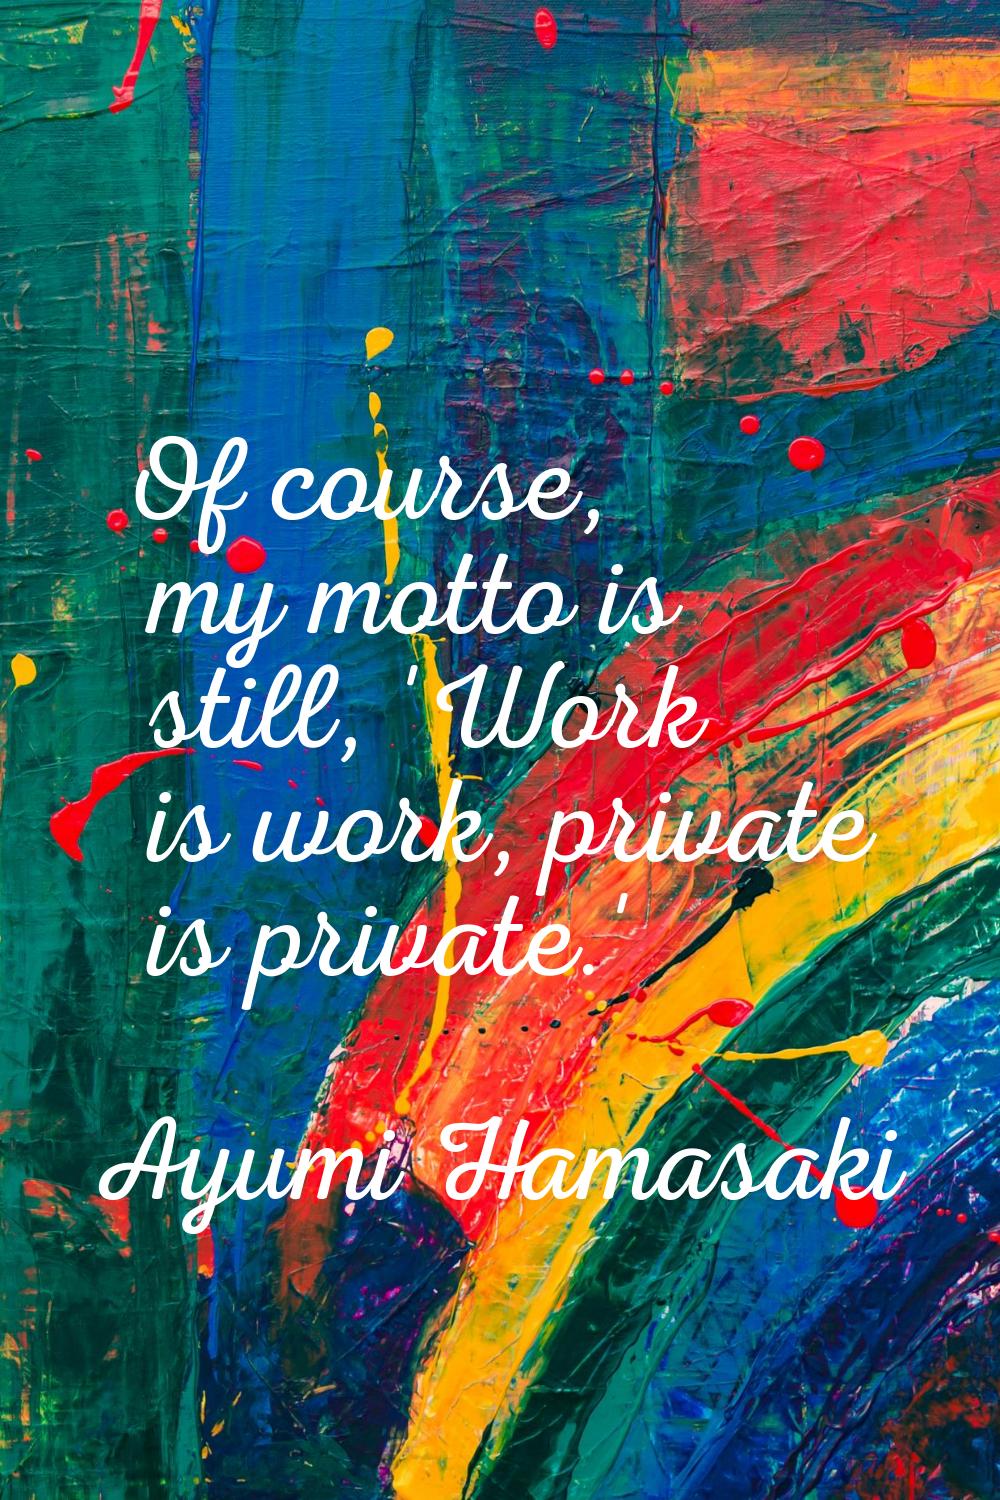 Of course, my motto is still, 'Work is work, private is private.'